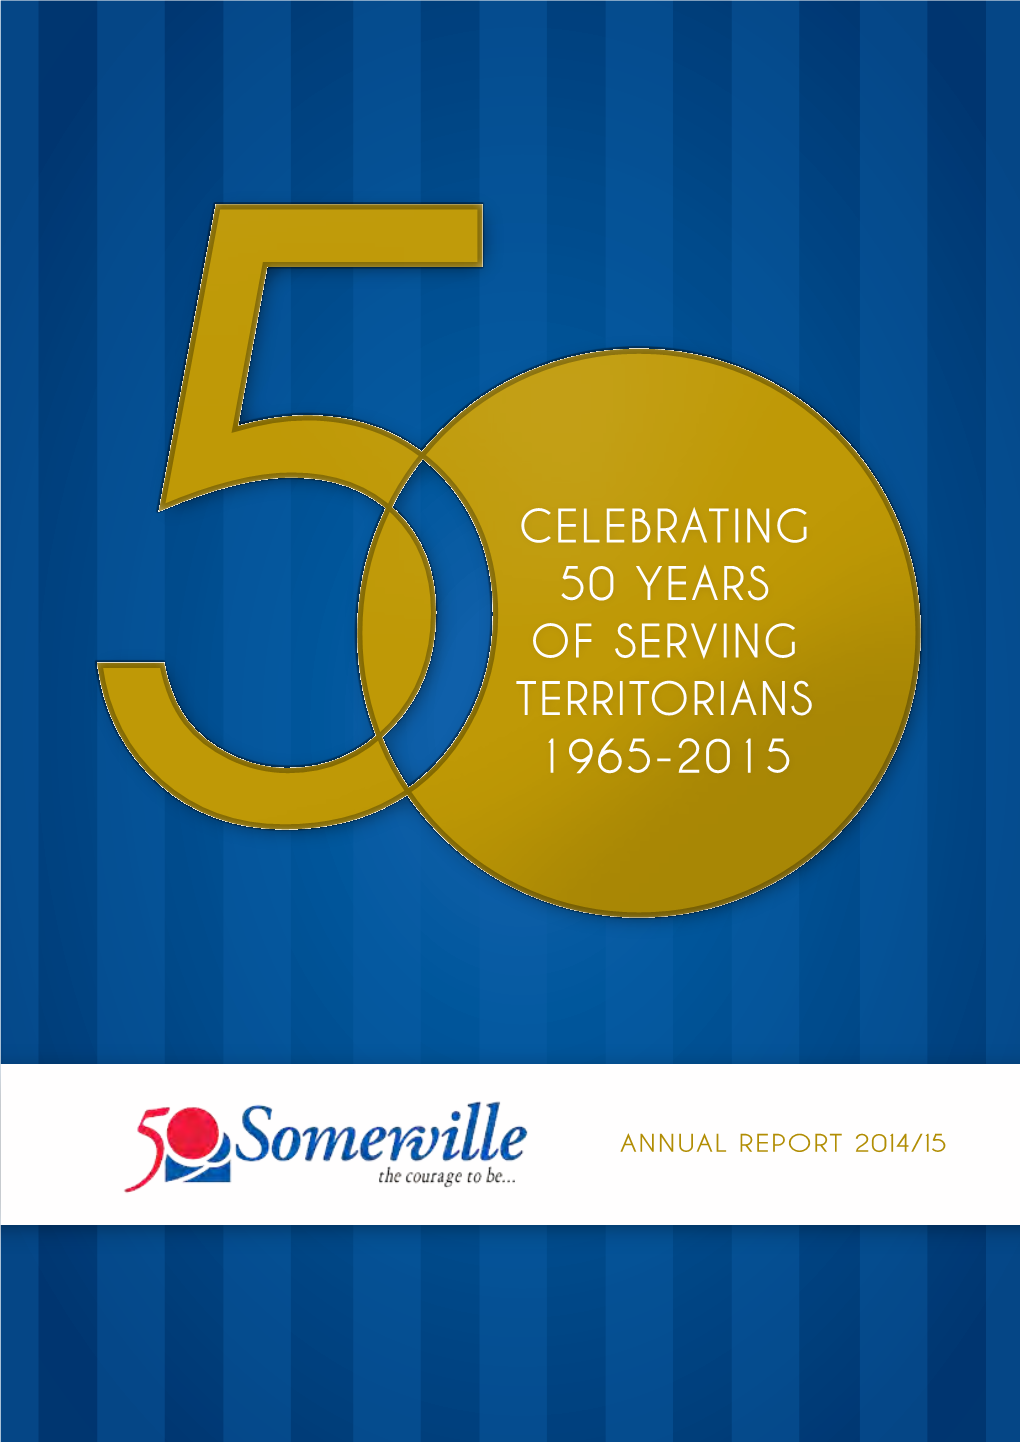 Celebrating 50 Years of Serving Territorians 1965-2015